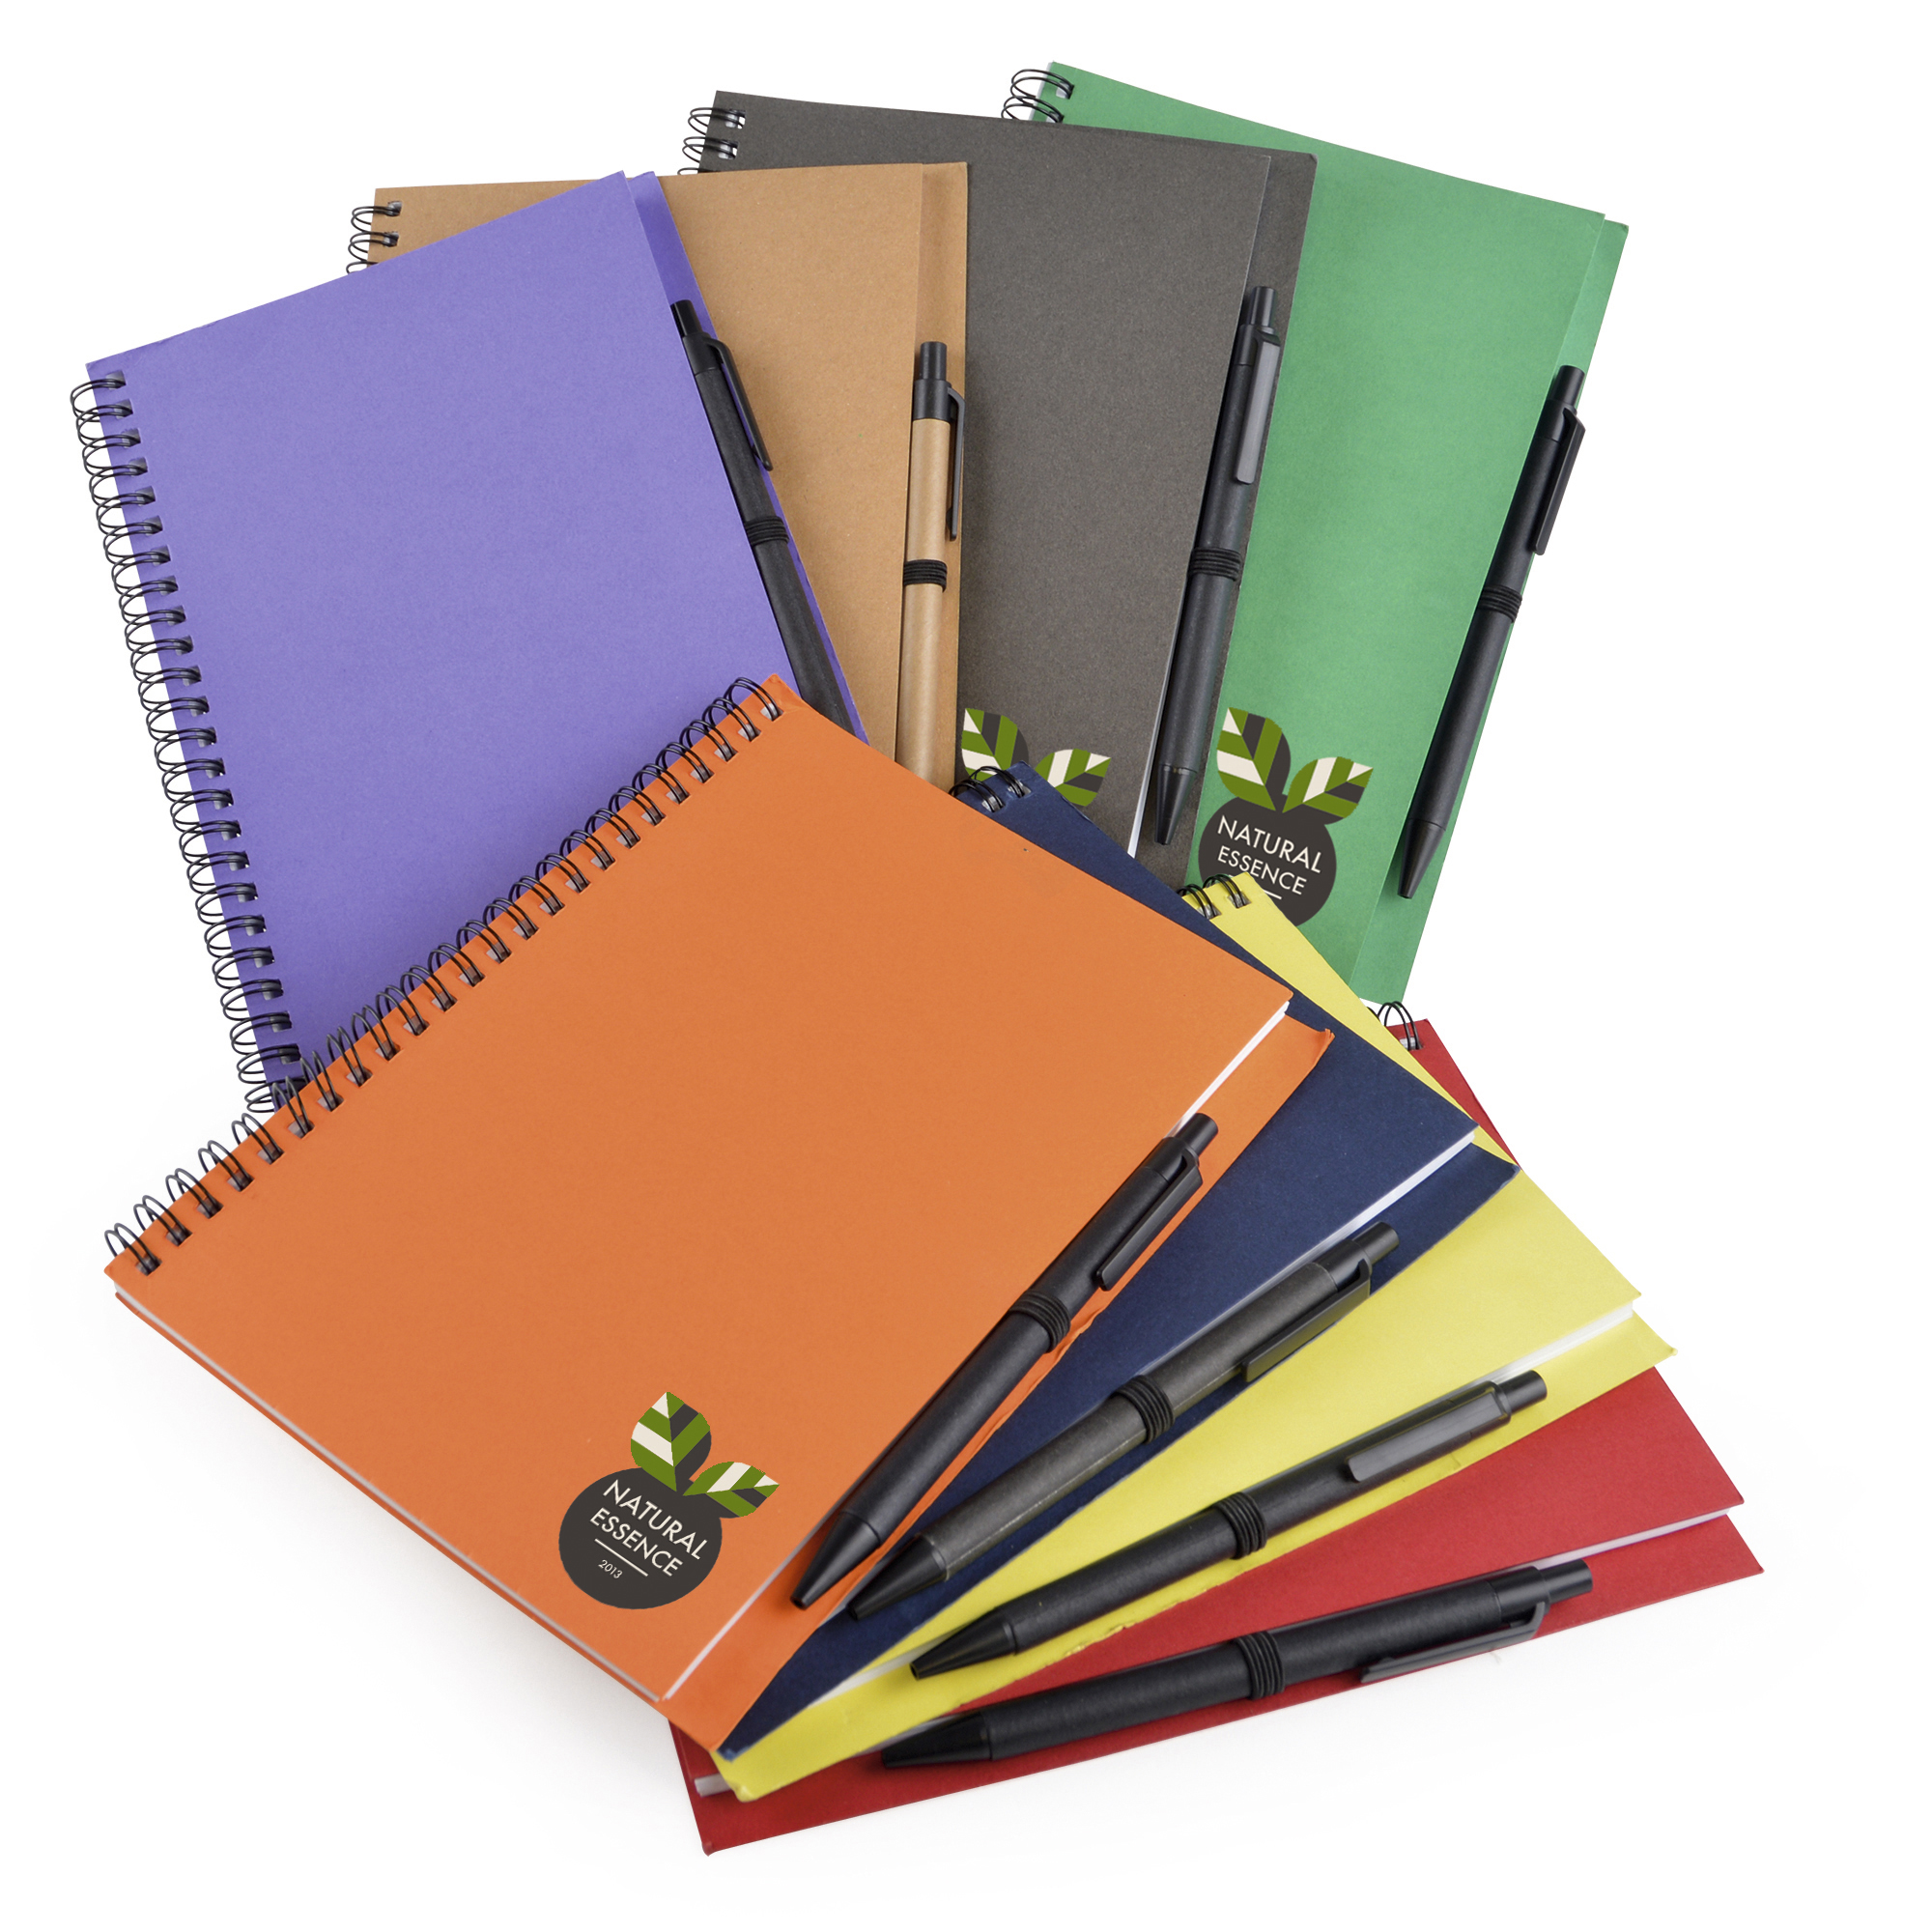 Promotional A5 Intimo Recycled Notebook and Pen.